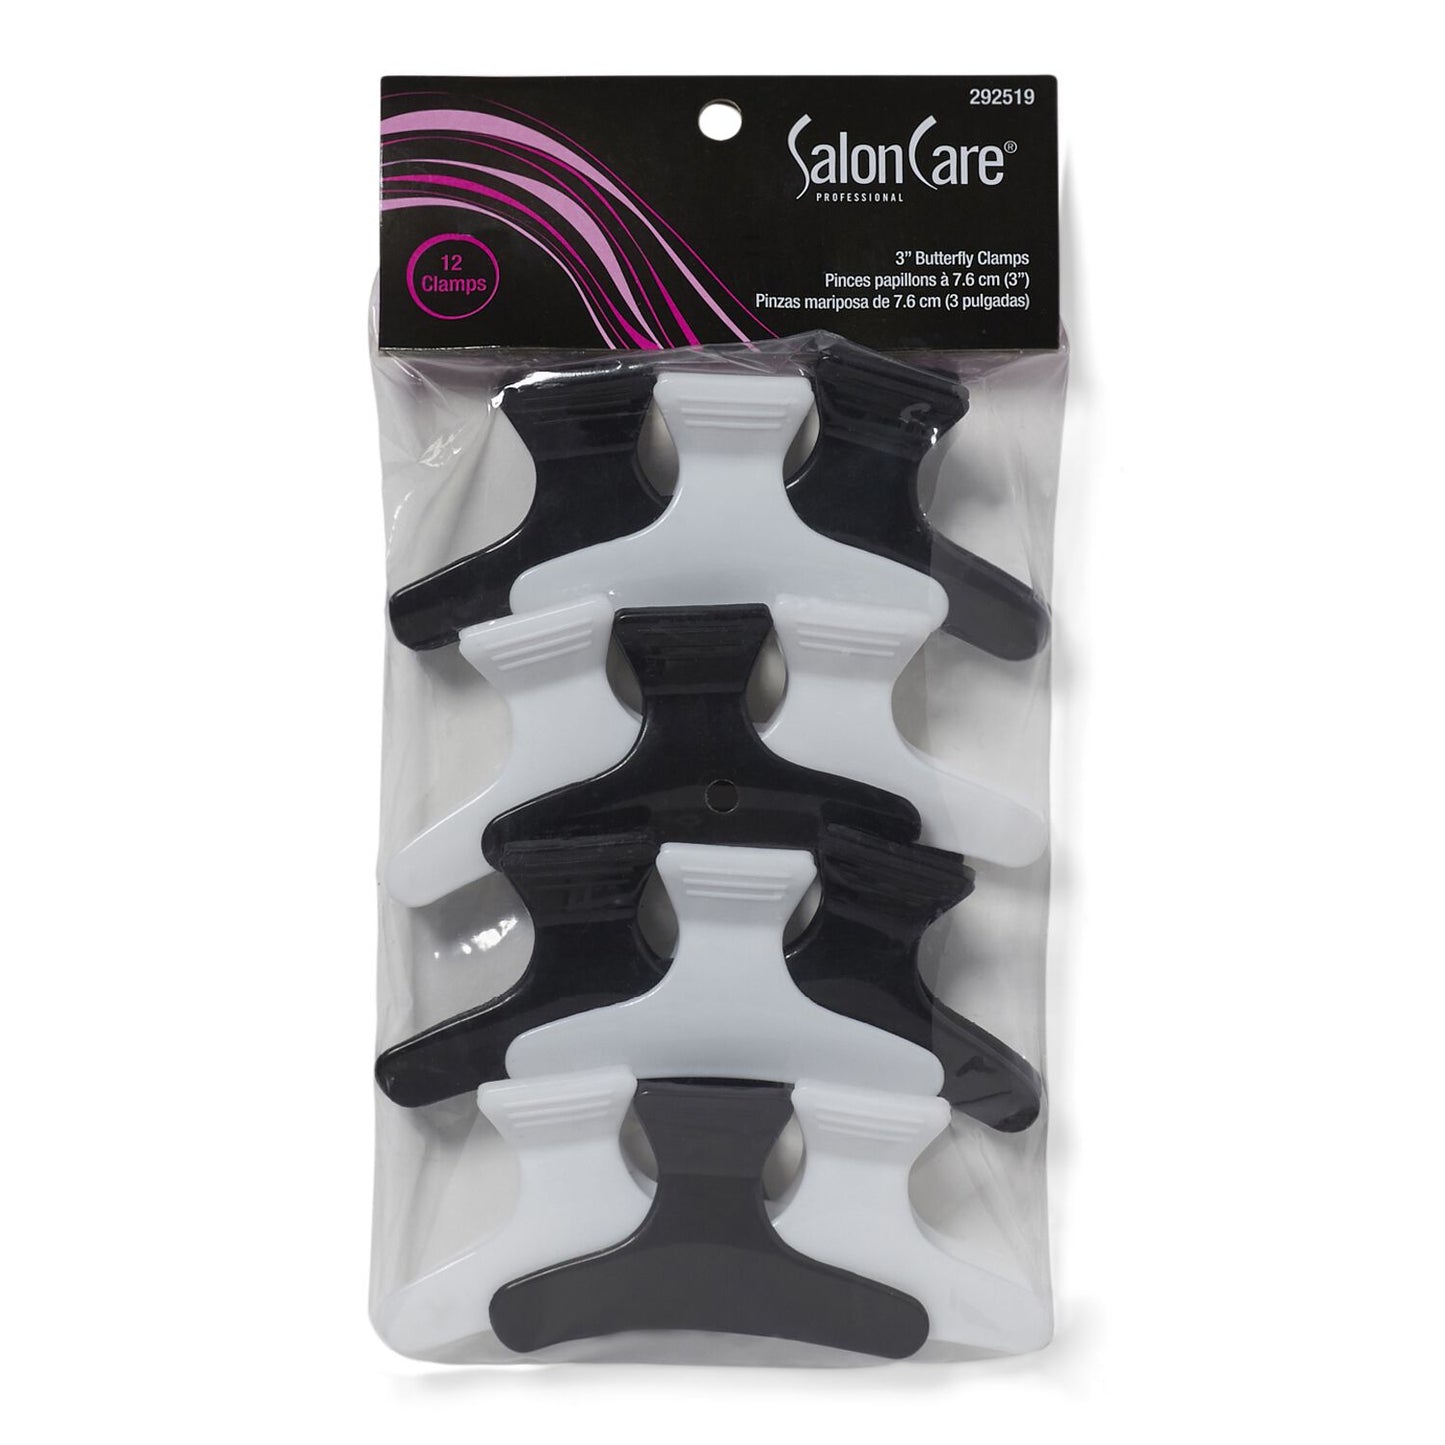 Salon Care Black & White 3 Inch Butterfly Clamps